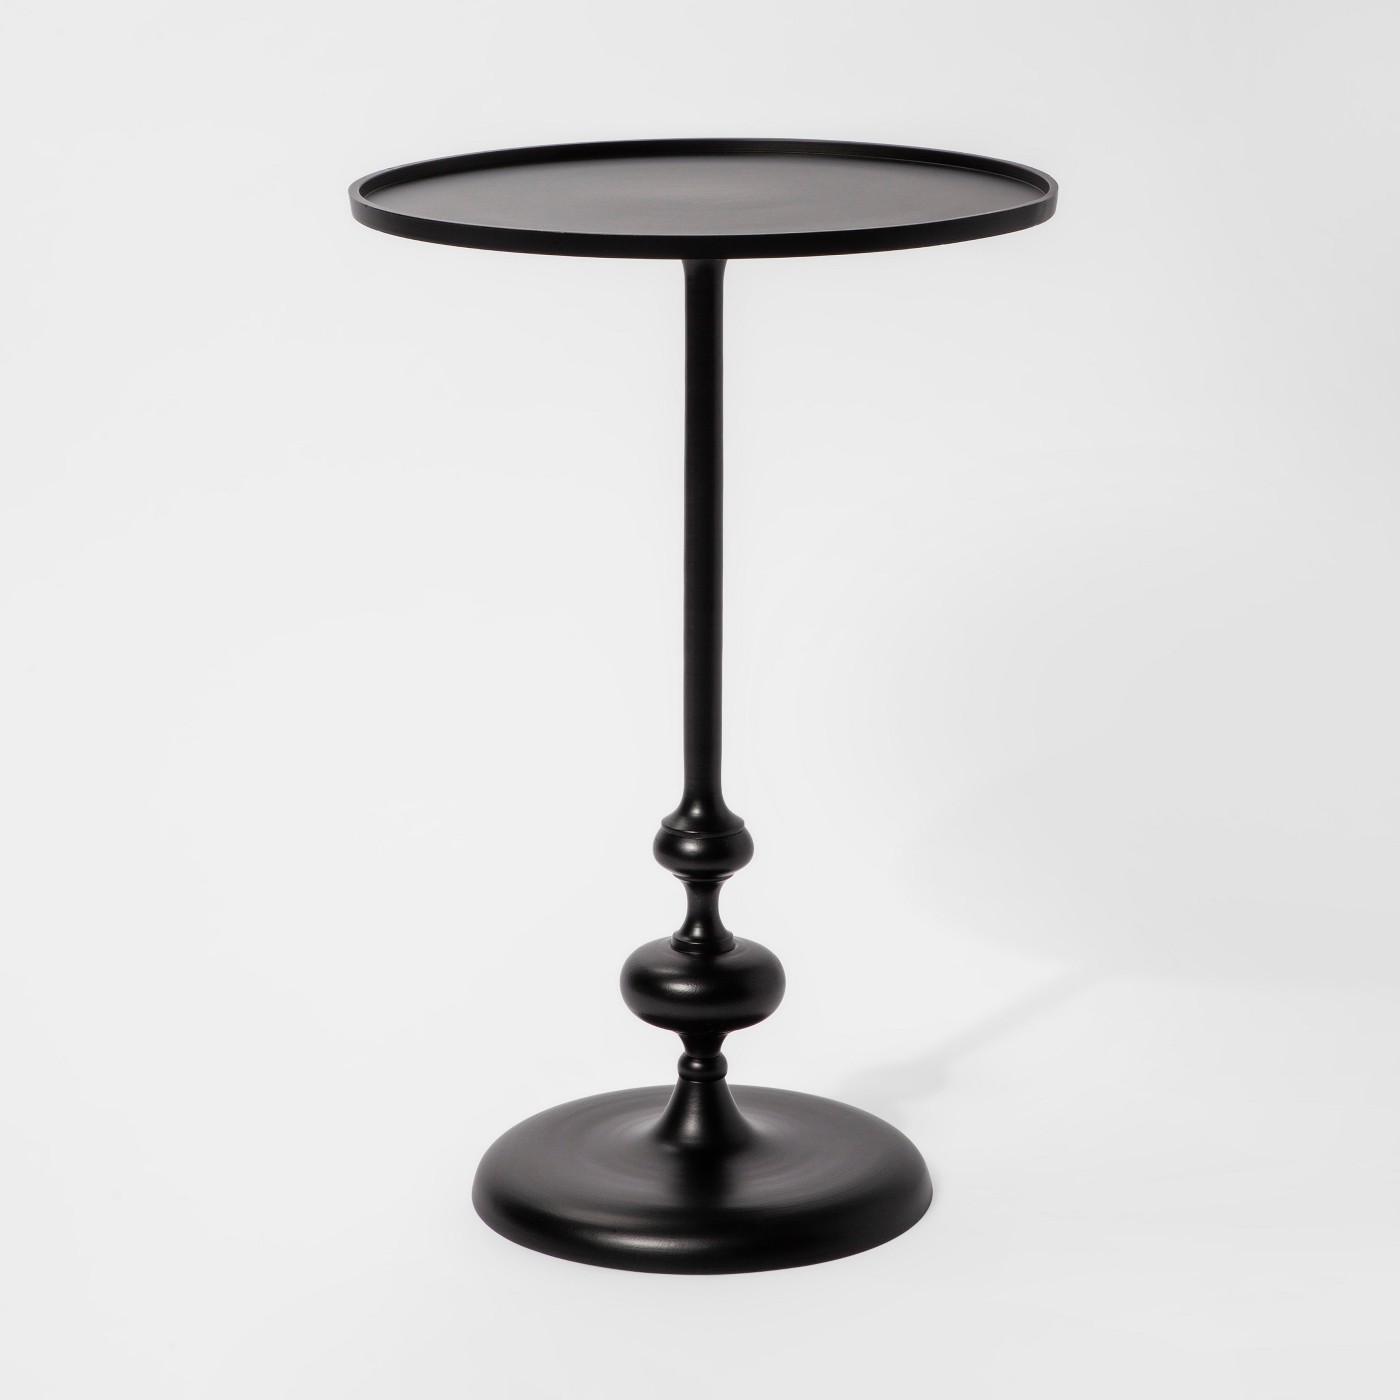 threshold londonberry turned accent table large black vip leg tap expand bath waste dale tiffany ceiling lamps plastic garden storage boxes small round side bench patio coffee and